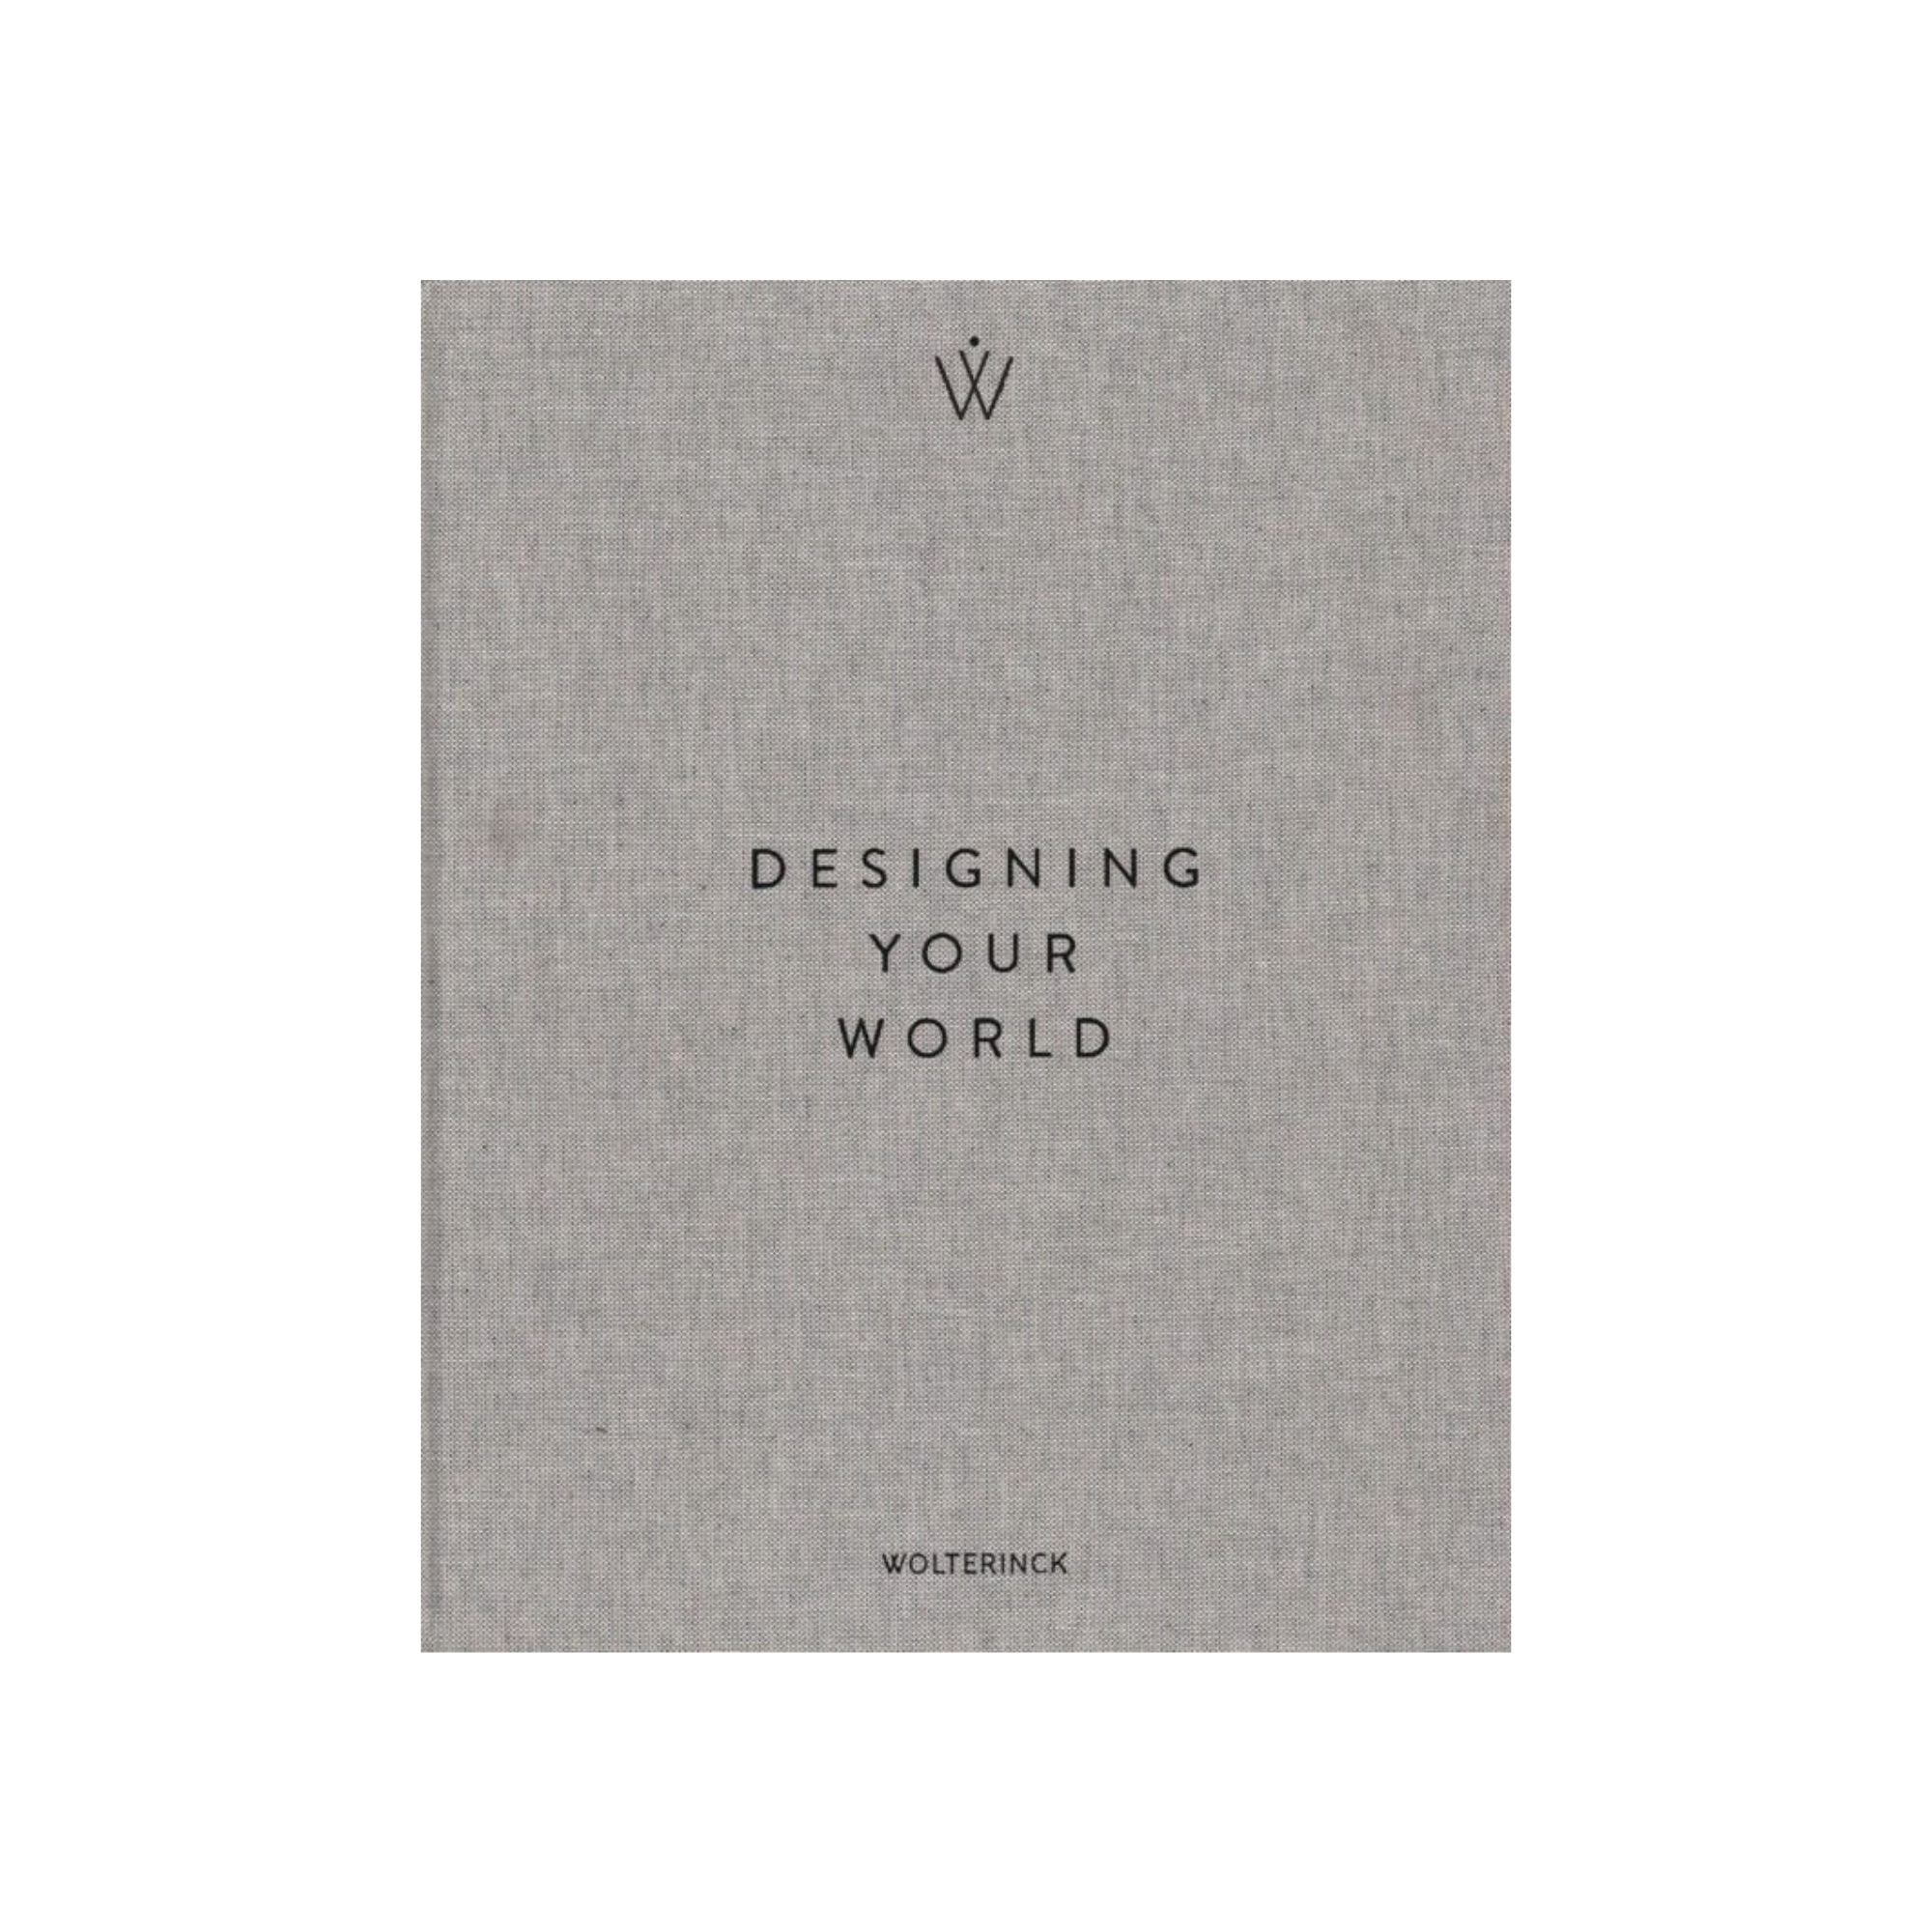 Designing Your World Book Wolterinck